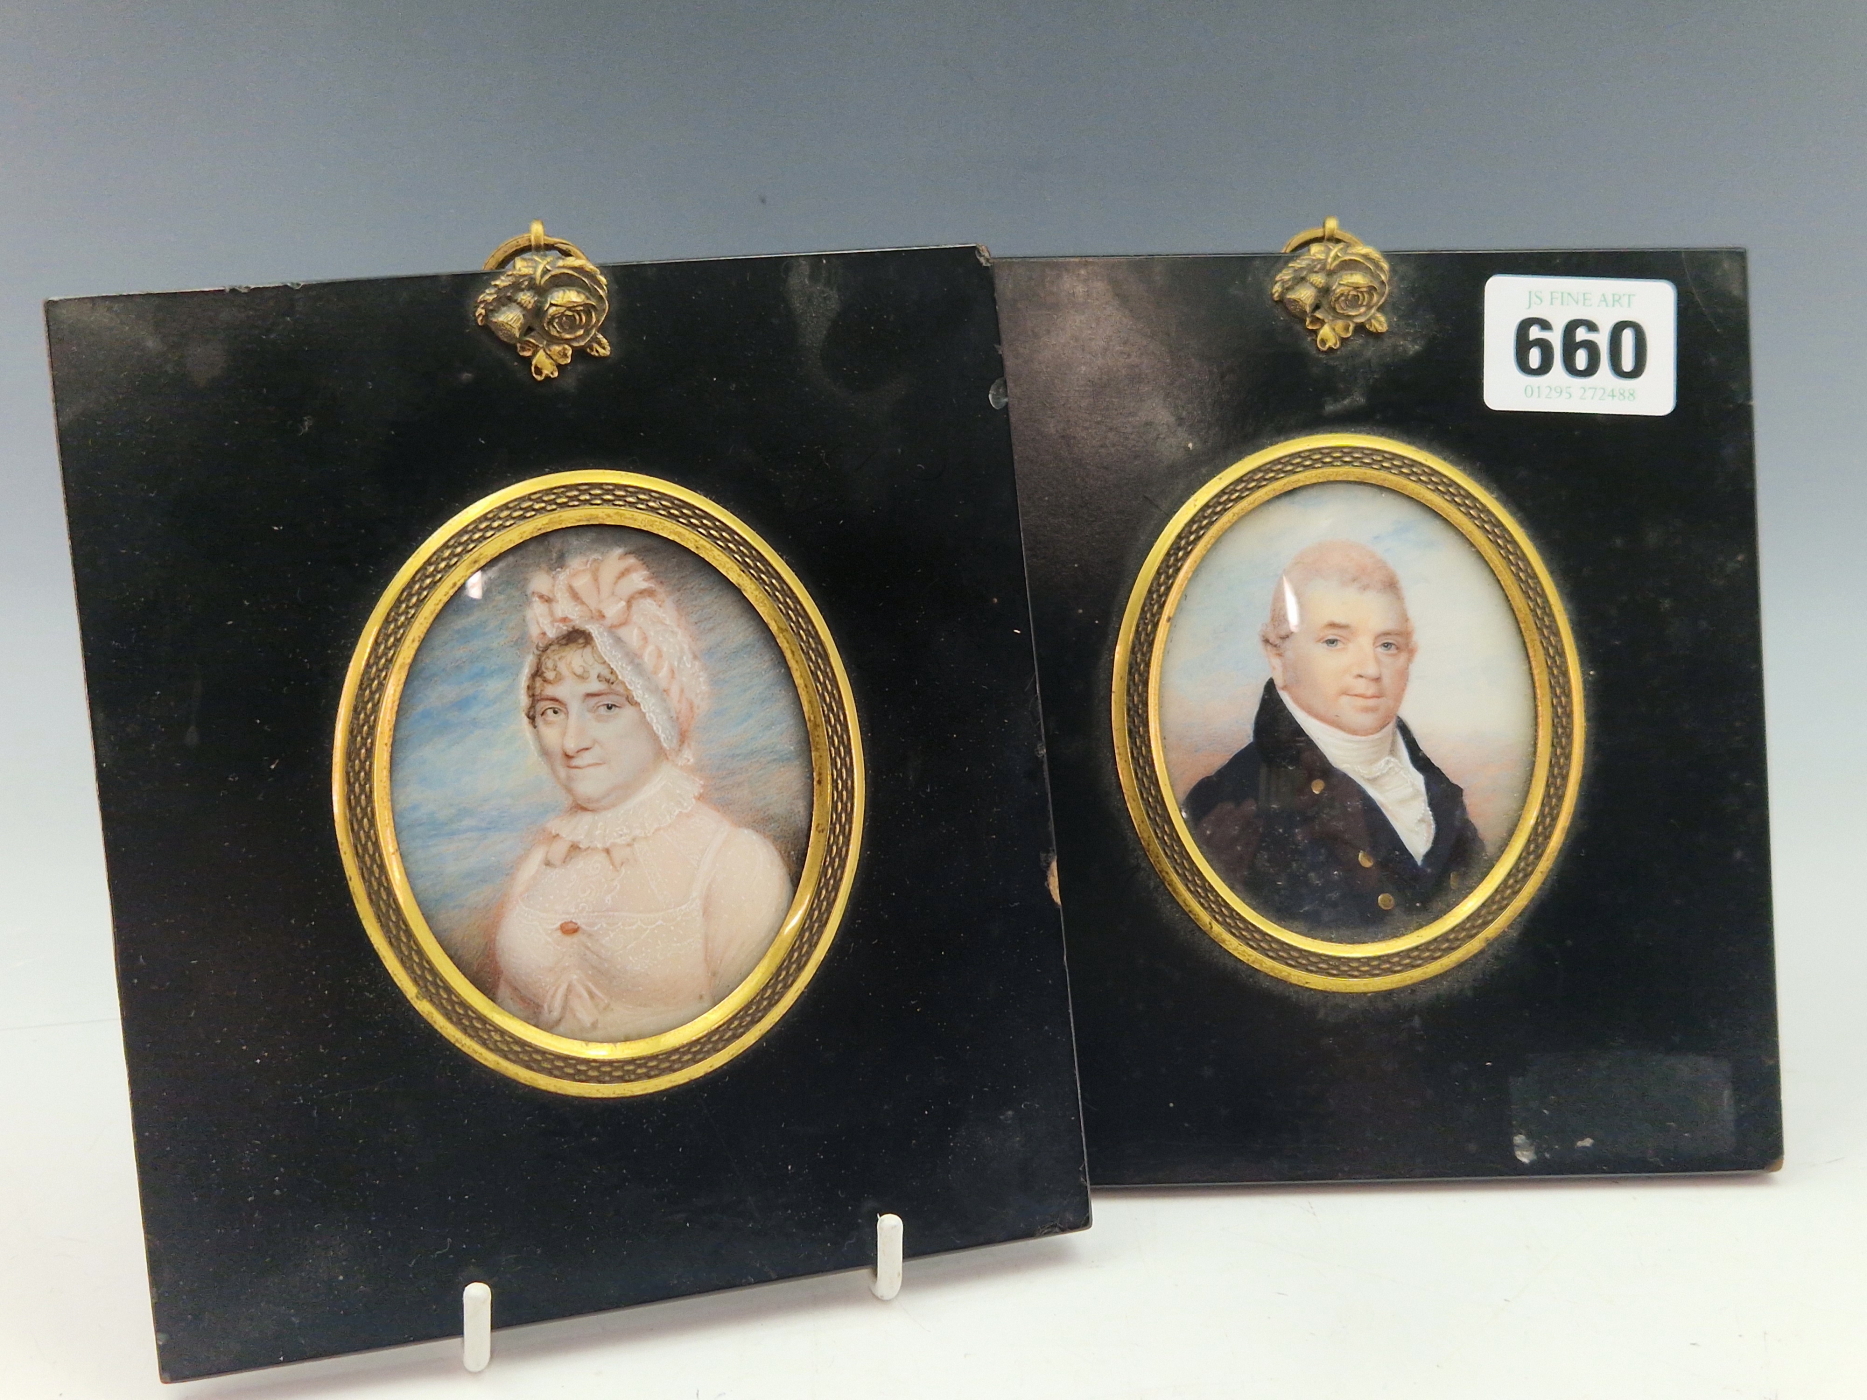 SIR CHARLES HAYTER (1761-1835), PORTRAIT MINIATURES OF WILLIAM AND OF MARY COX, DATED 1808 AND - Image 5 of 7